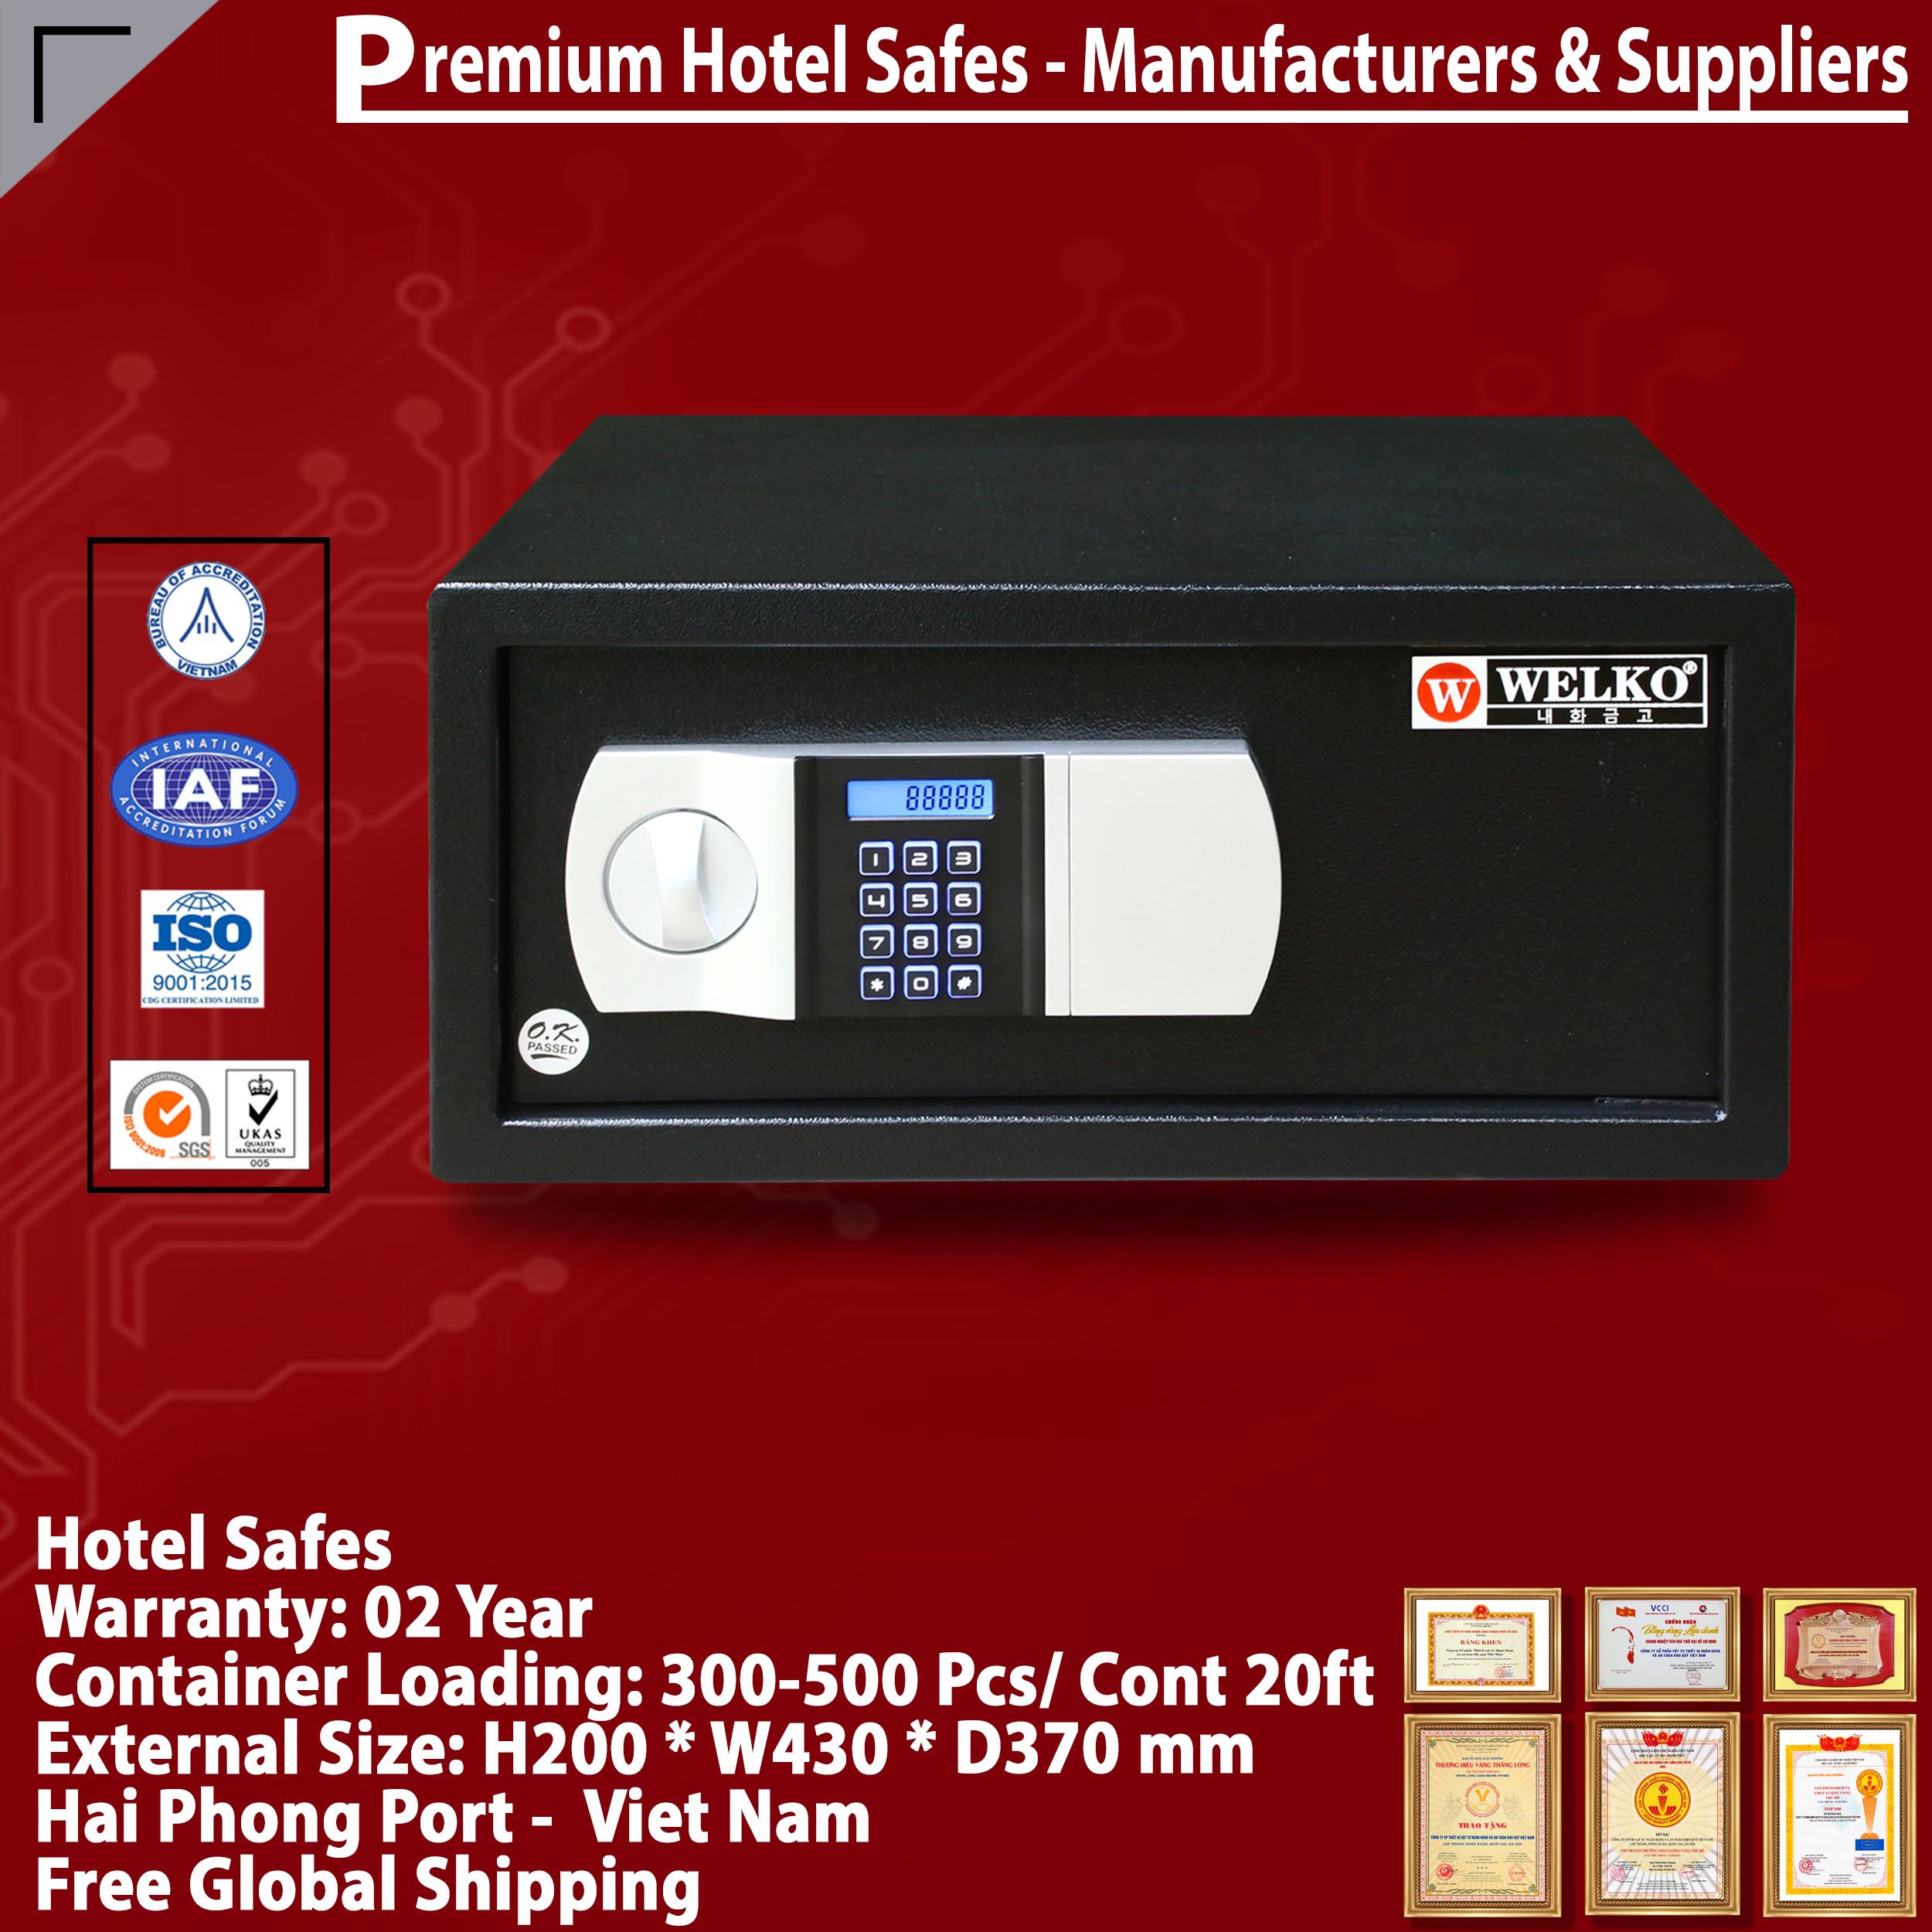 Buy Best Hotel Safe For Home Factory Direct & Fast Shipping‎g‎ WELKO, Safes For Hotels From Ireland's